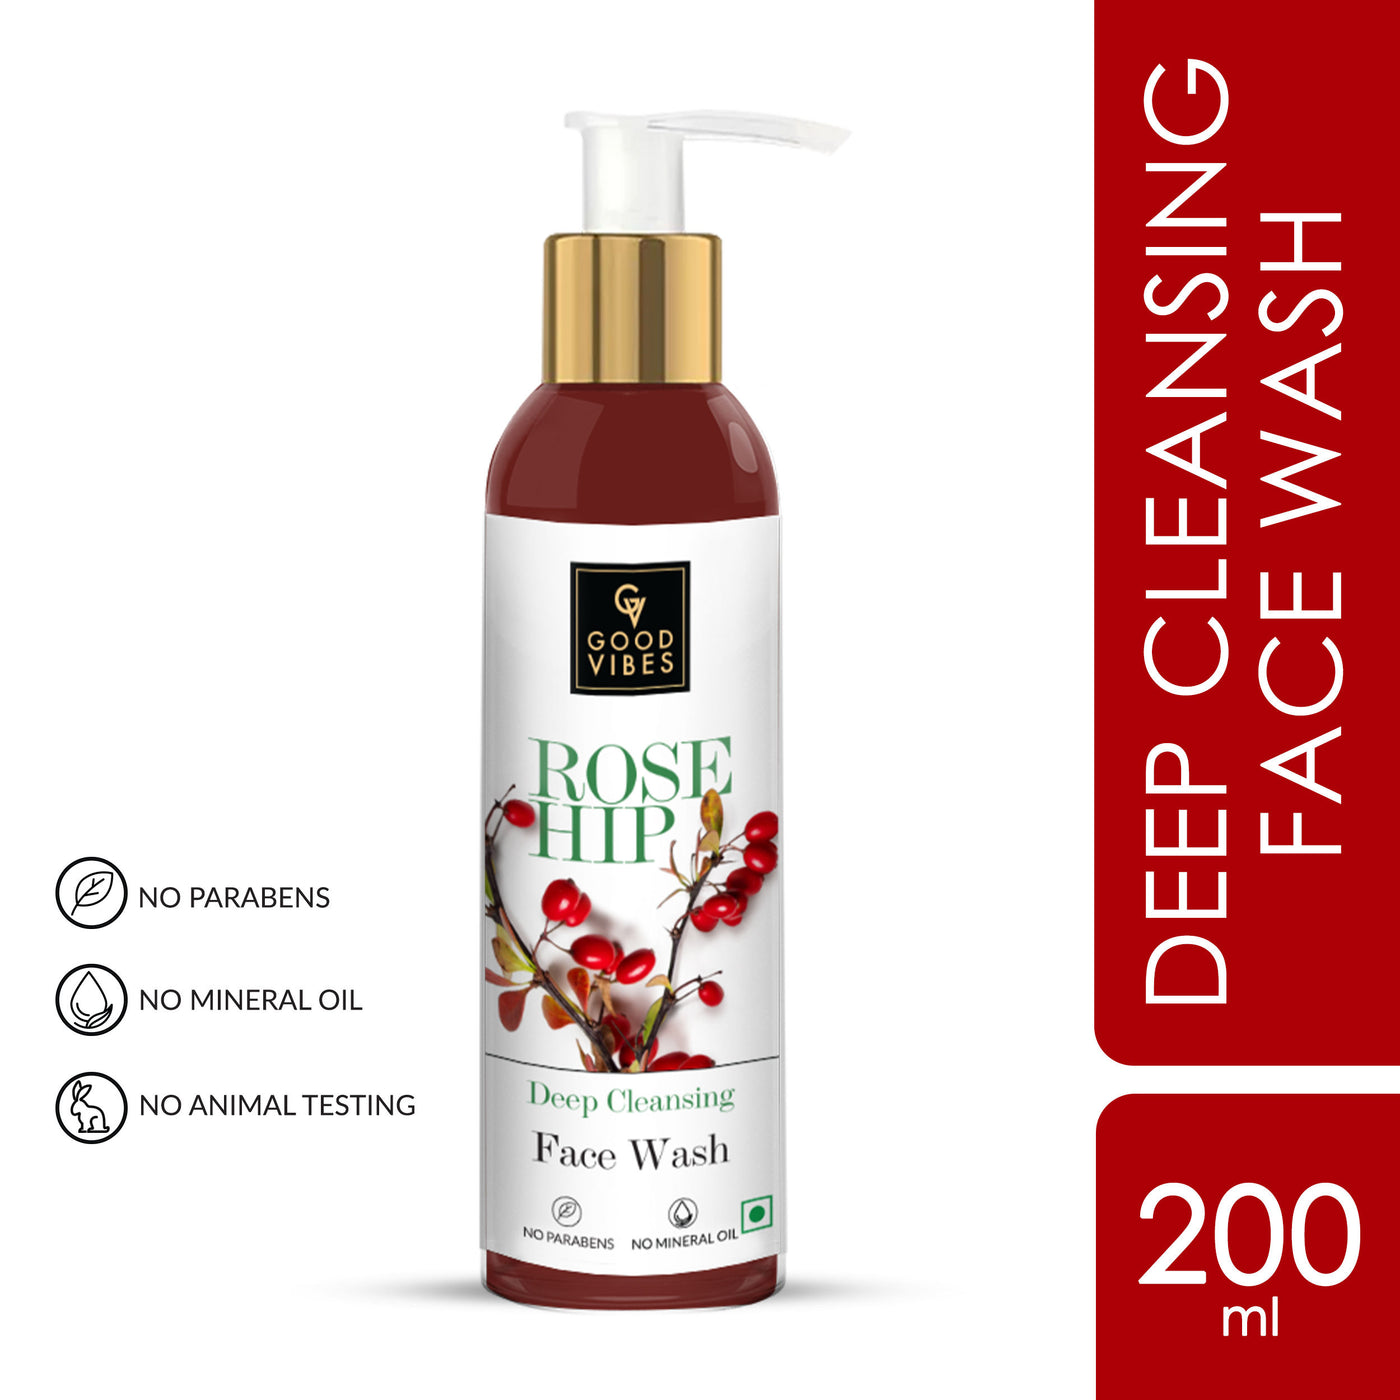 good-vibes-deep-cleansing-face-wash-rosehip-200-ml-1-84-53-2